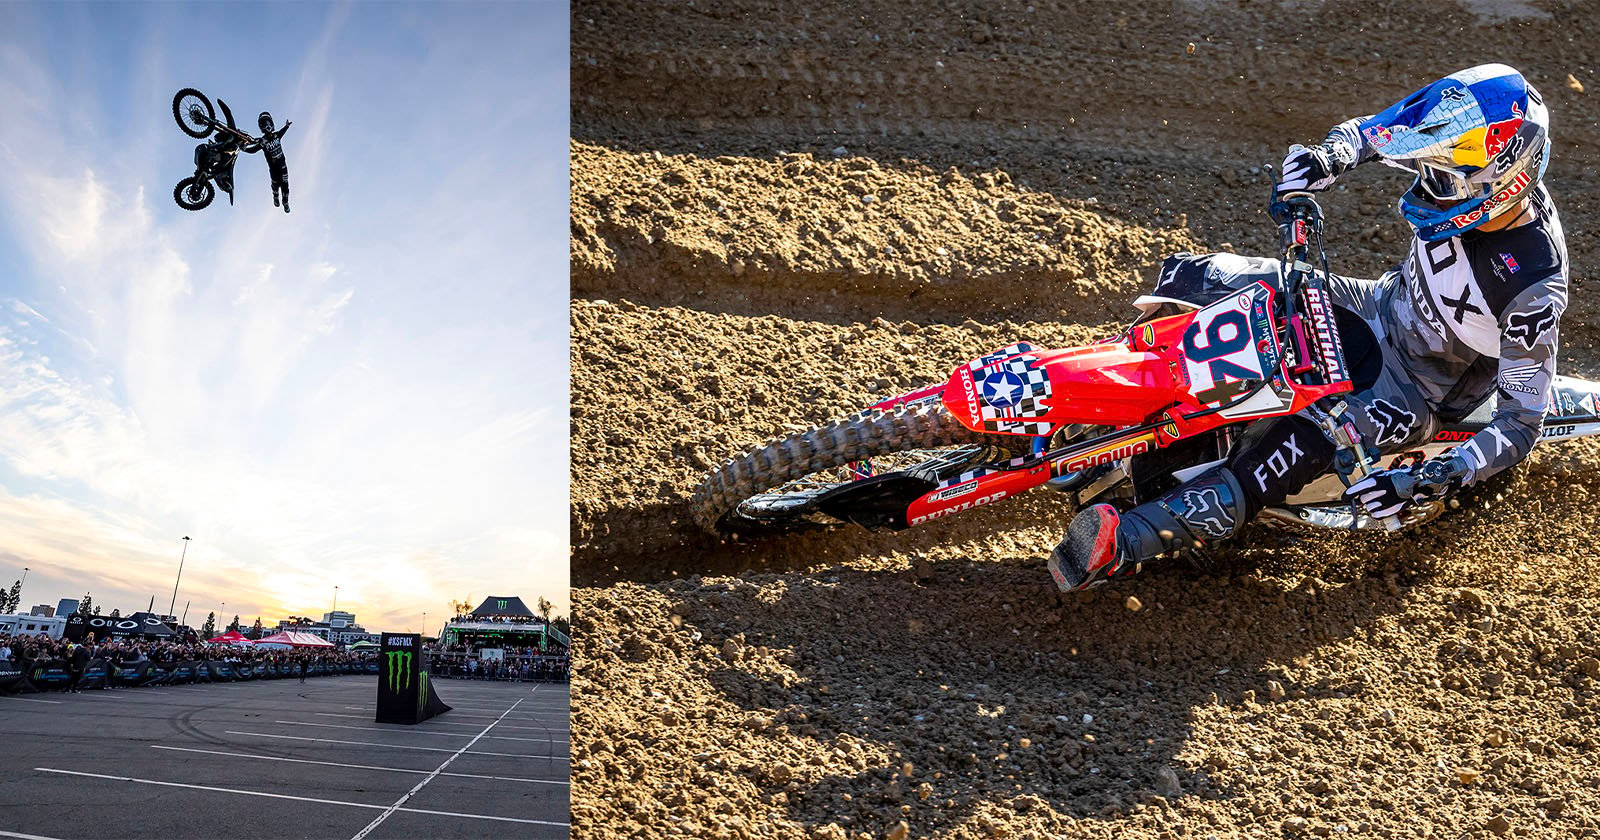 Using the R3 for Photographing Motocross